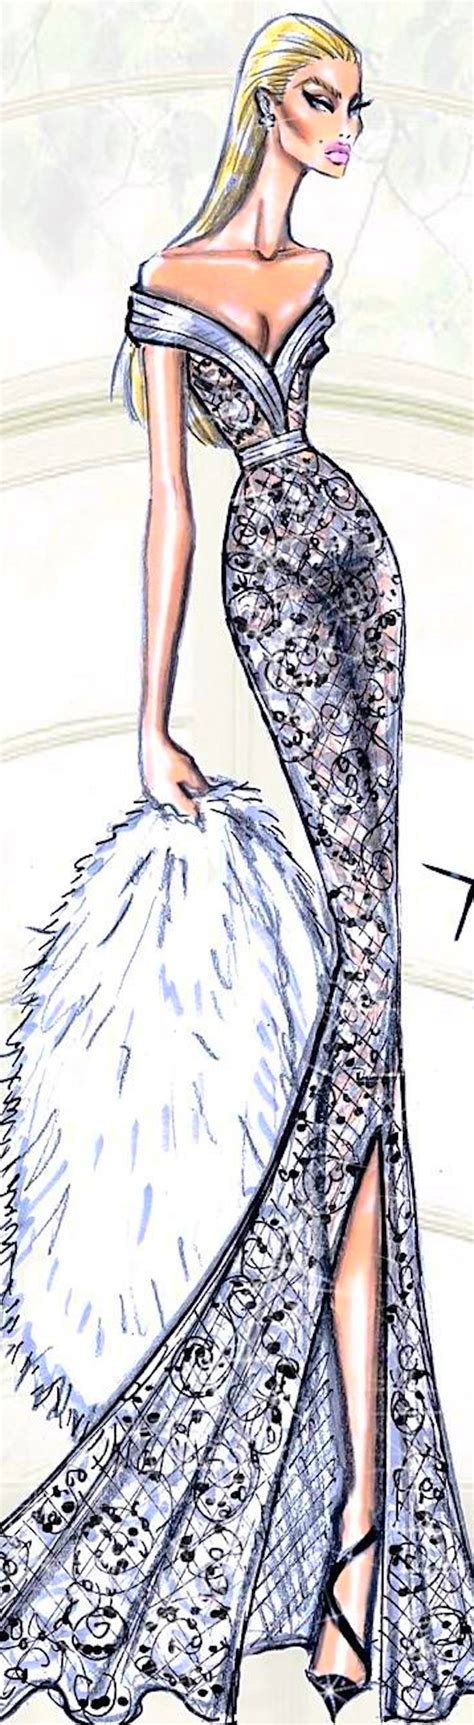 Pin By Kathy Patages On Hayden Williams Fashion Model Sketch Fashion